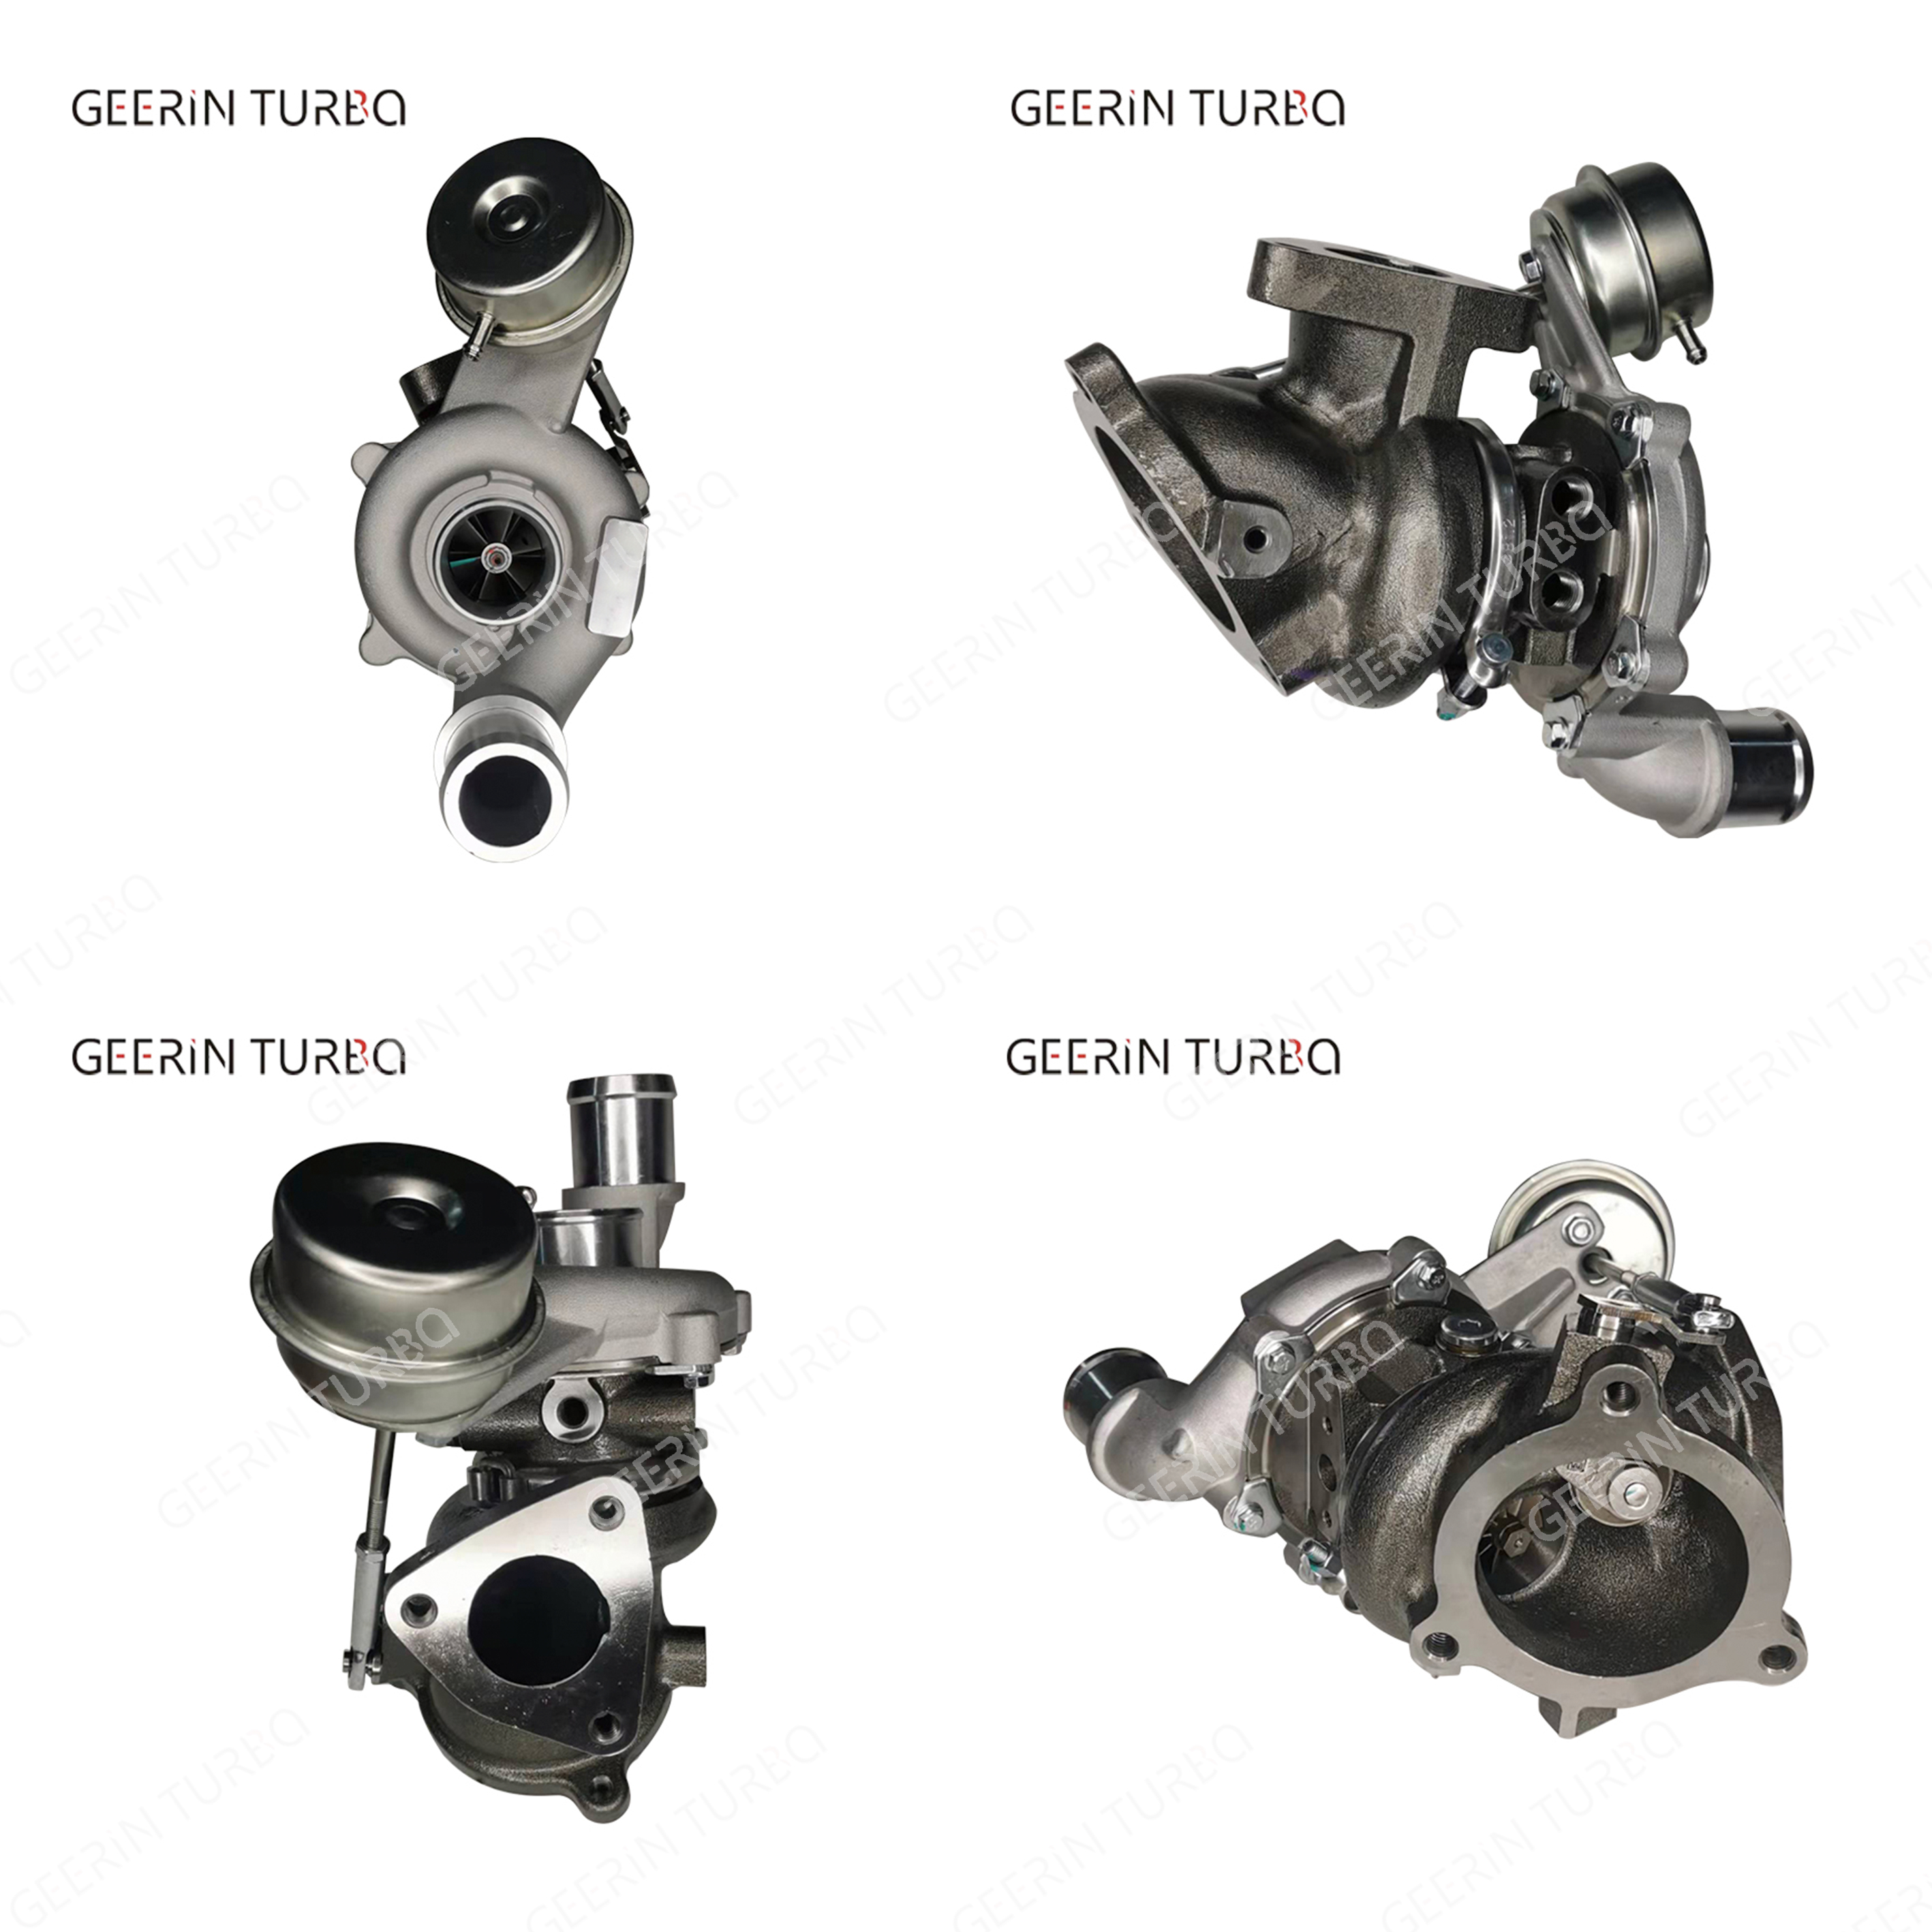 Comprar GT1549S 790317-0001 Turbo Charger Turbocharger Para Ford 3.5L,GT1549S 790317-0001 Turbo Charger Turbocharger Para Ford 3.5L Preço,GT1549S 790317-0001 Turbo Charger Turbocharger Para Ford 3.5L   Marcas,GT1549S 790317-0001 Turbo Charger Turbocharger Para Ford 3.5L Fabricante,GT1549S 790317-0001 Turbo Charger Turbocharger Para Ford 3.5L Mercado,GT1549S 790317-0001 Turbo Charger Turbocharger Para Ford 3.5L Companhia,